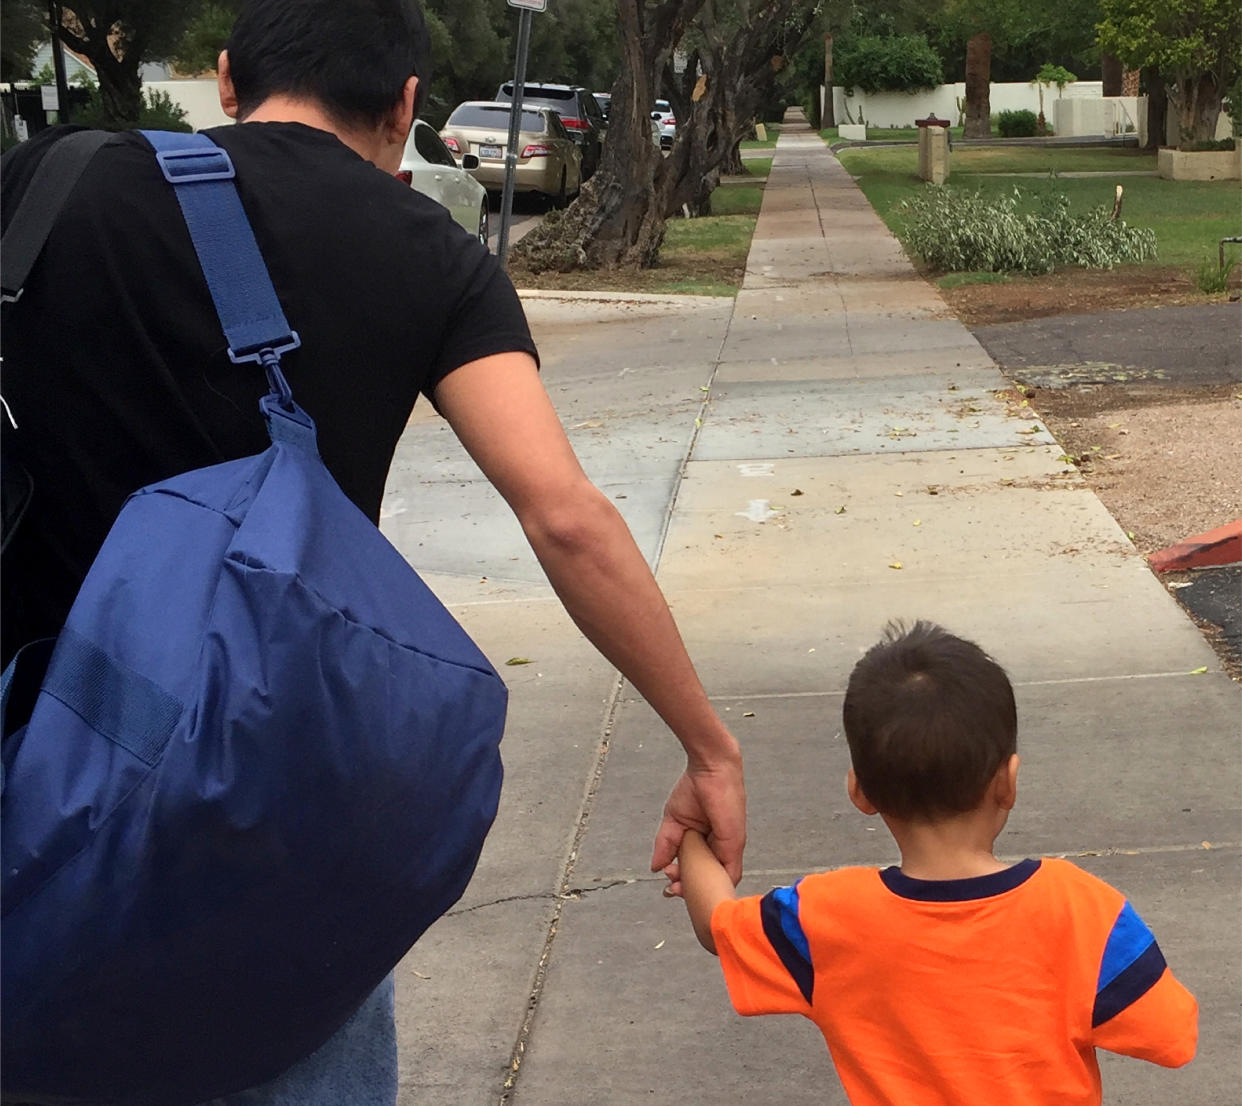 Jose A. and his 3-year-old son were reunited after being separated by border officials at the Hidalgo Port of Entry in Texas in May. (Photo: Gracie Willis/Southern Poverty Law Center)